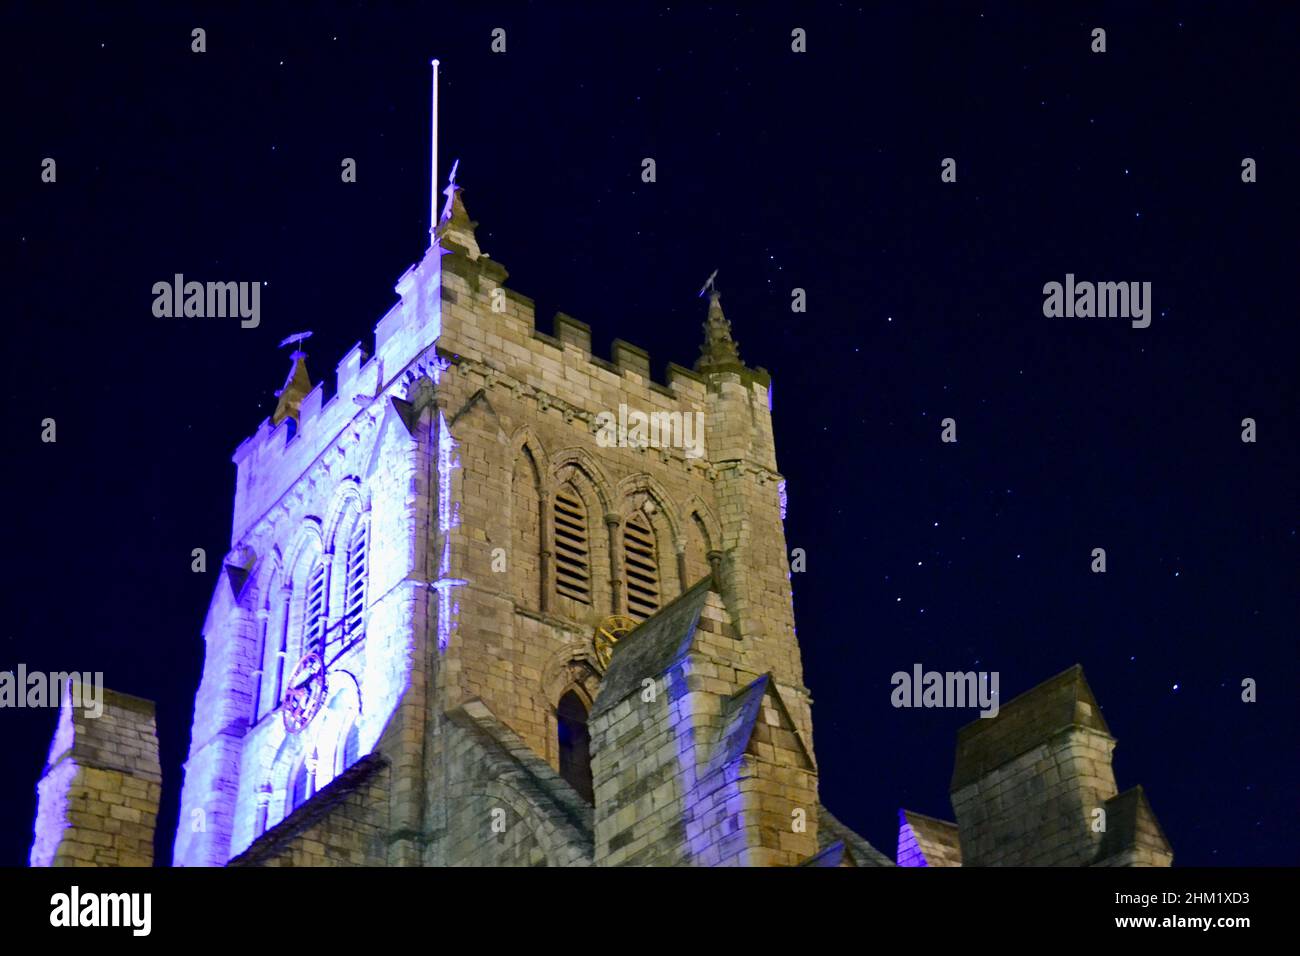 St Hilda's Church tower, Hartlepool Headland, UK with a stunning clear night sky. The stars are shining including the constellation of Orion. Stock Photo